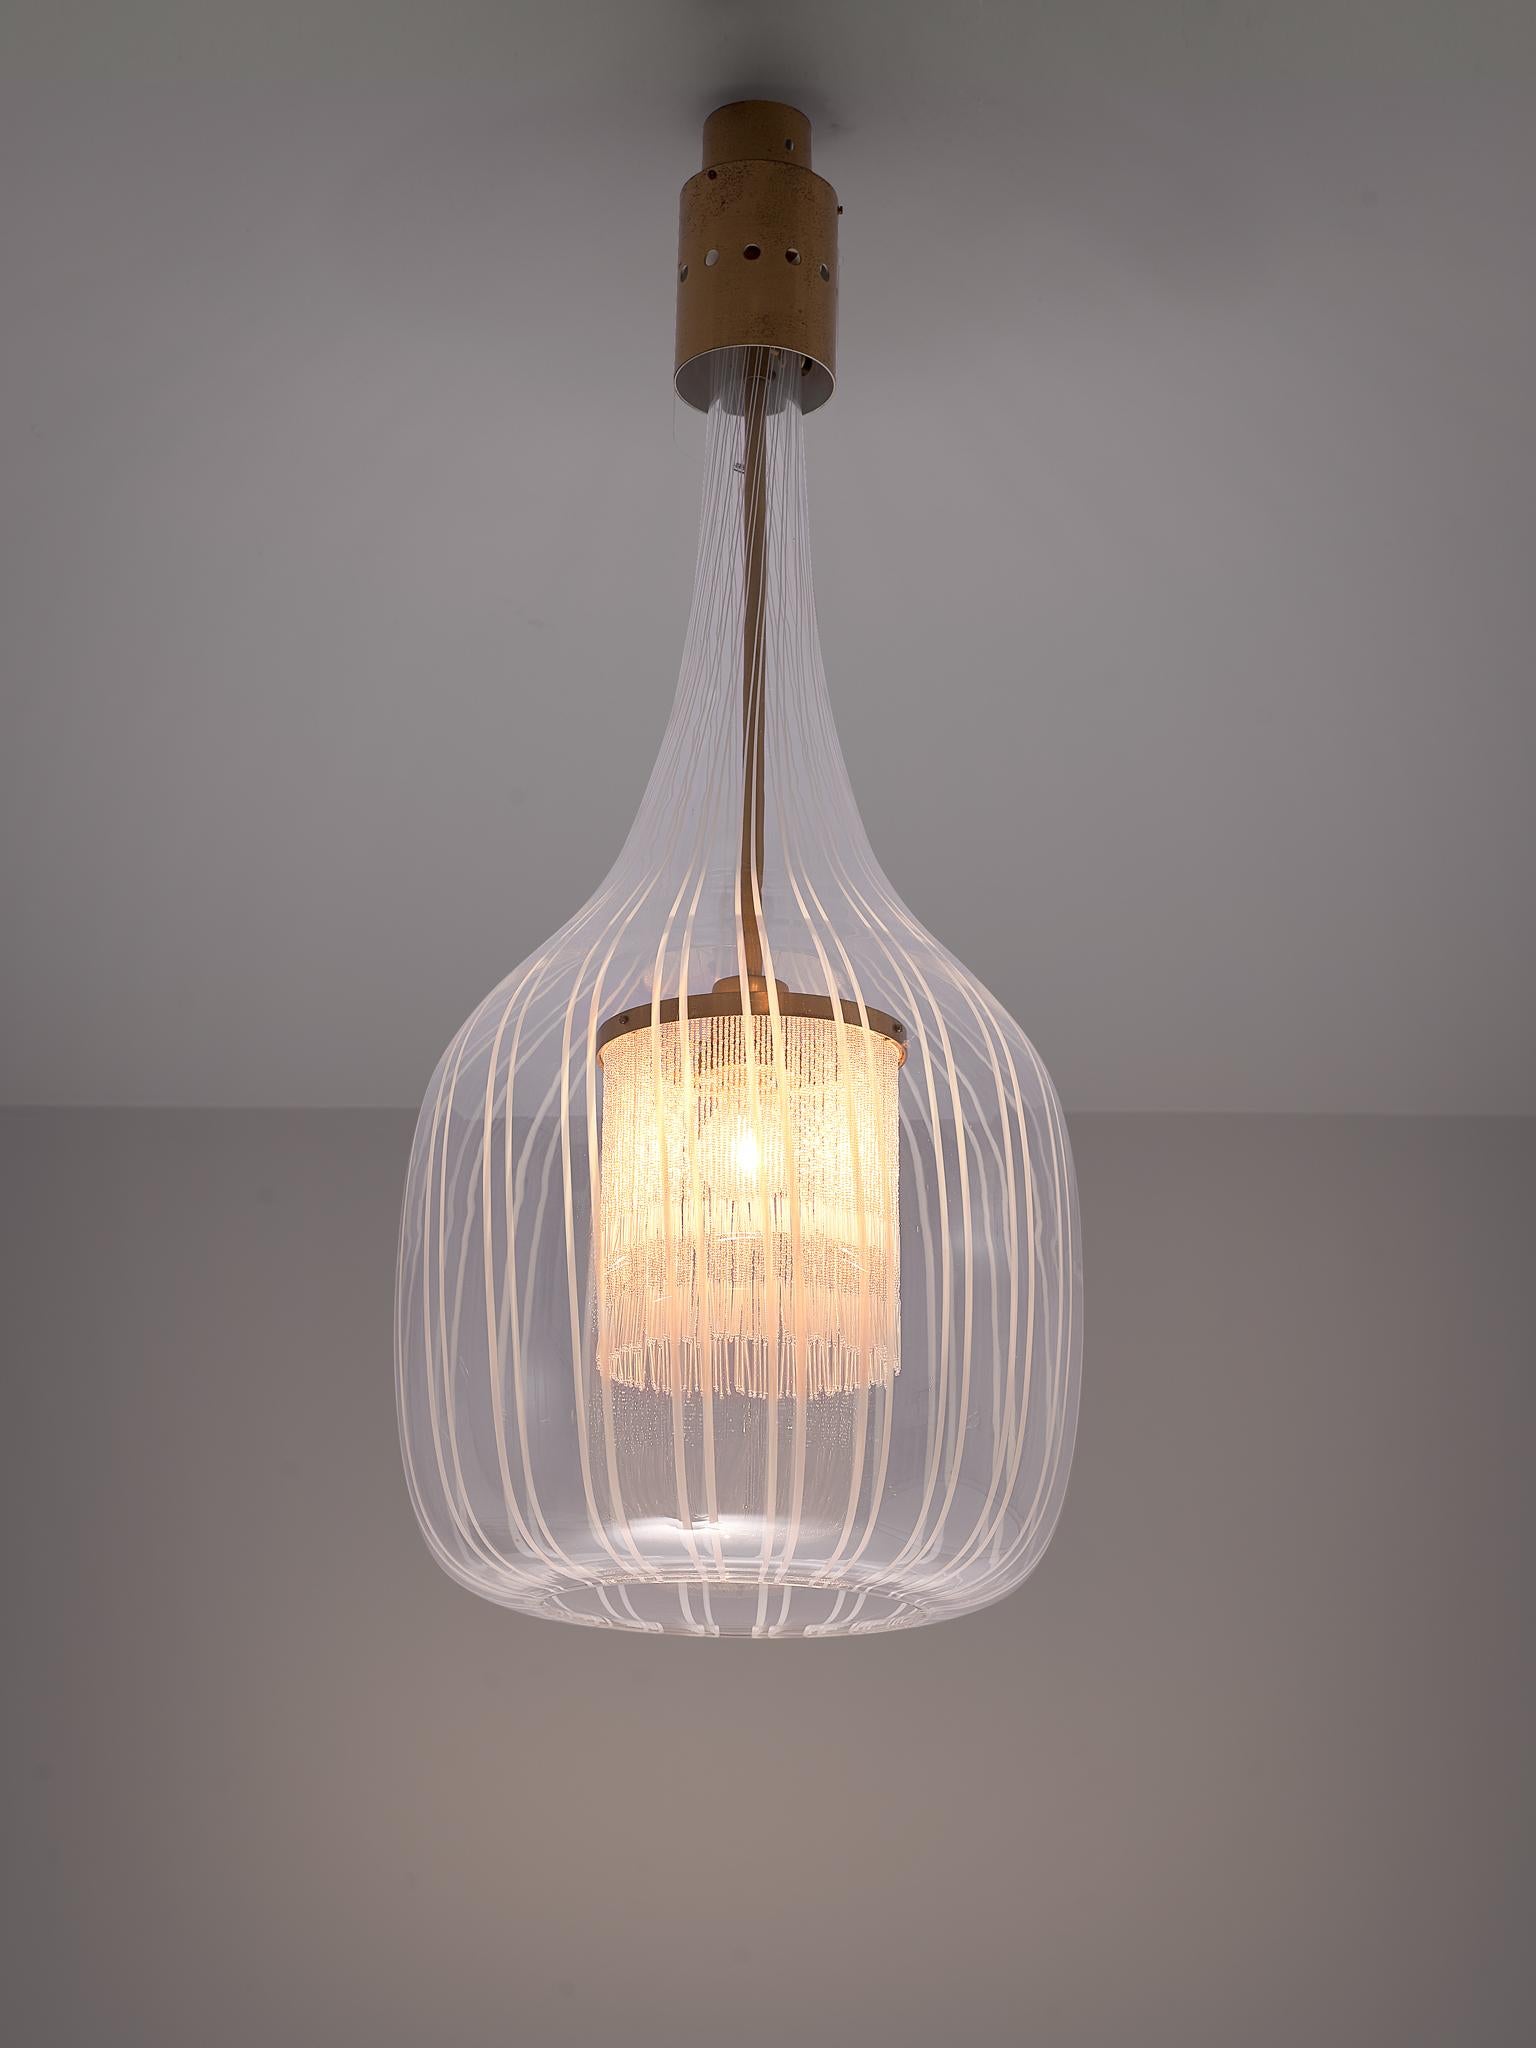 Angelo Brotto for Esperia, ceiling light, glass, cotton and brass, Italy, 1970s

A lantern designed by Angelo Brotto, executed in blown Murano glass. Inside the glass shade is a fringe of cotton that surrounds the light bulb. The pendant is finished